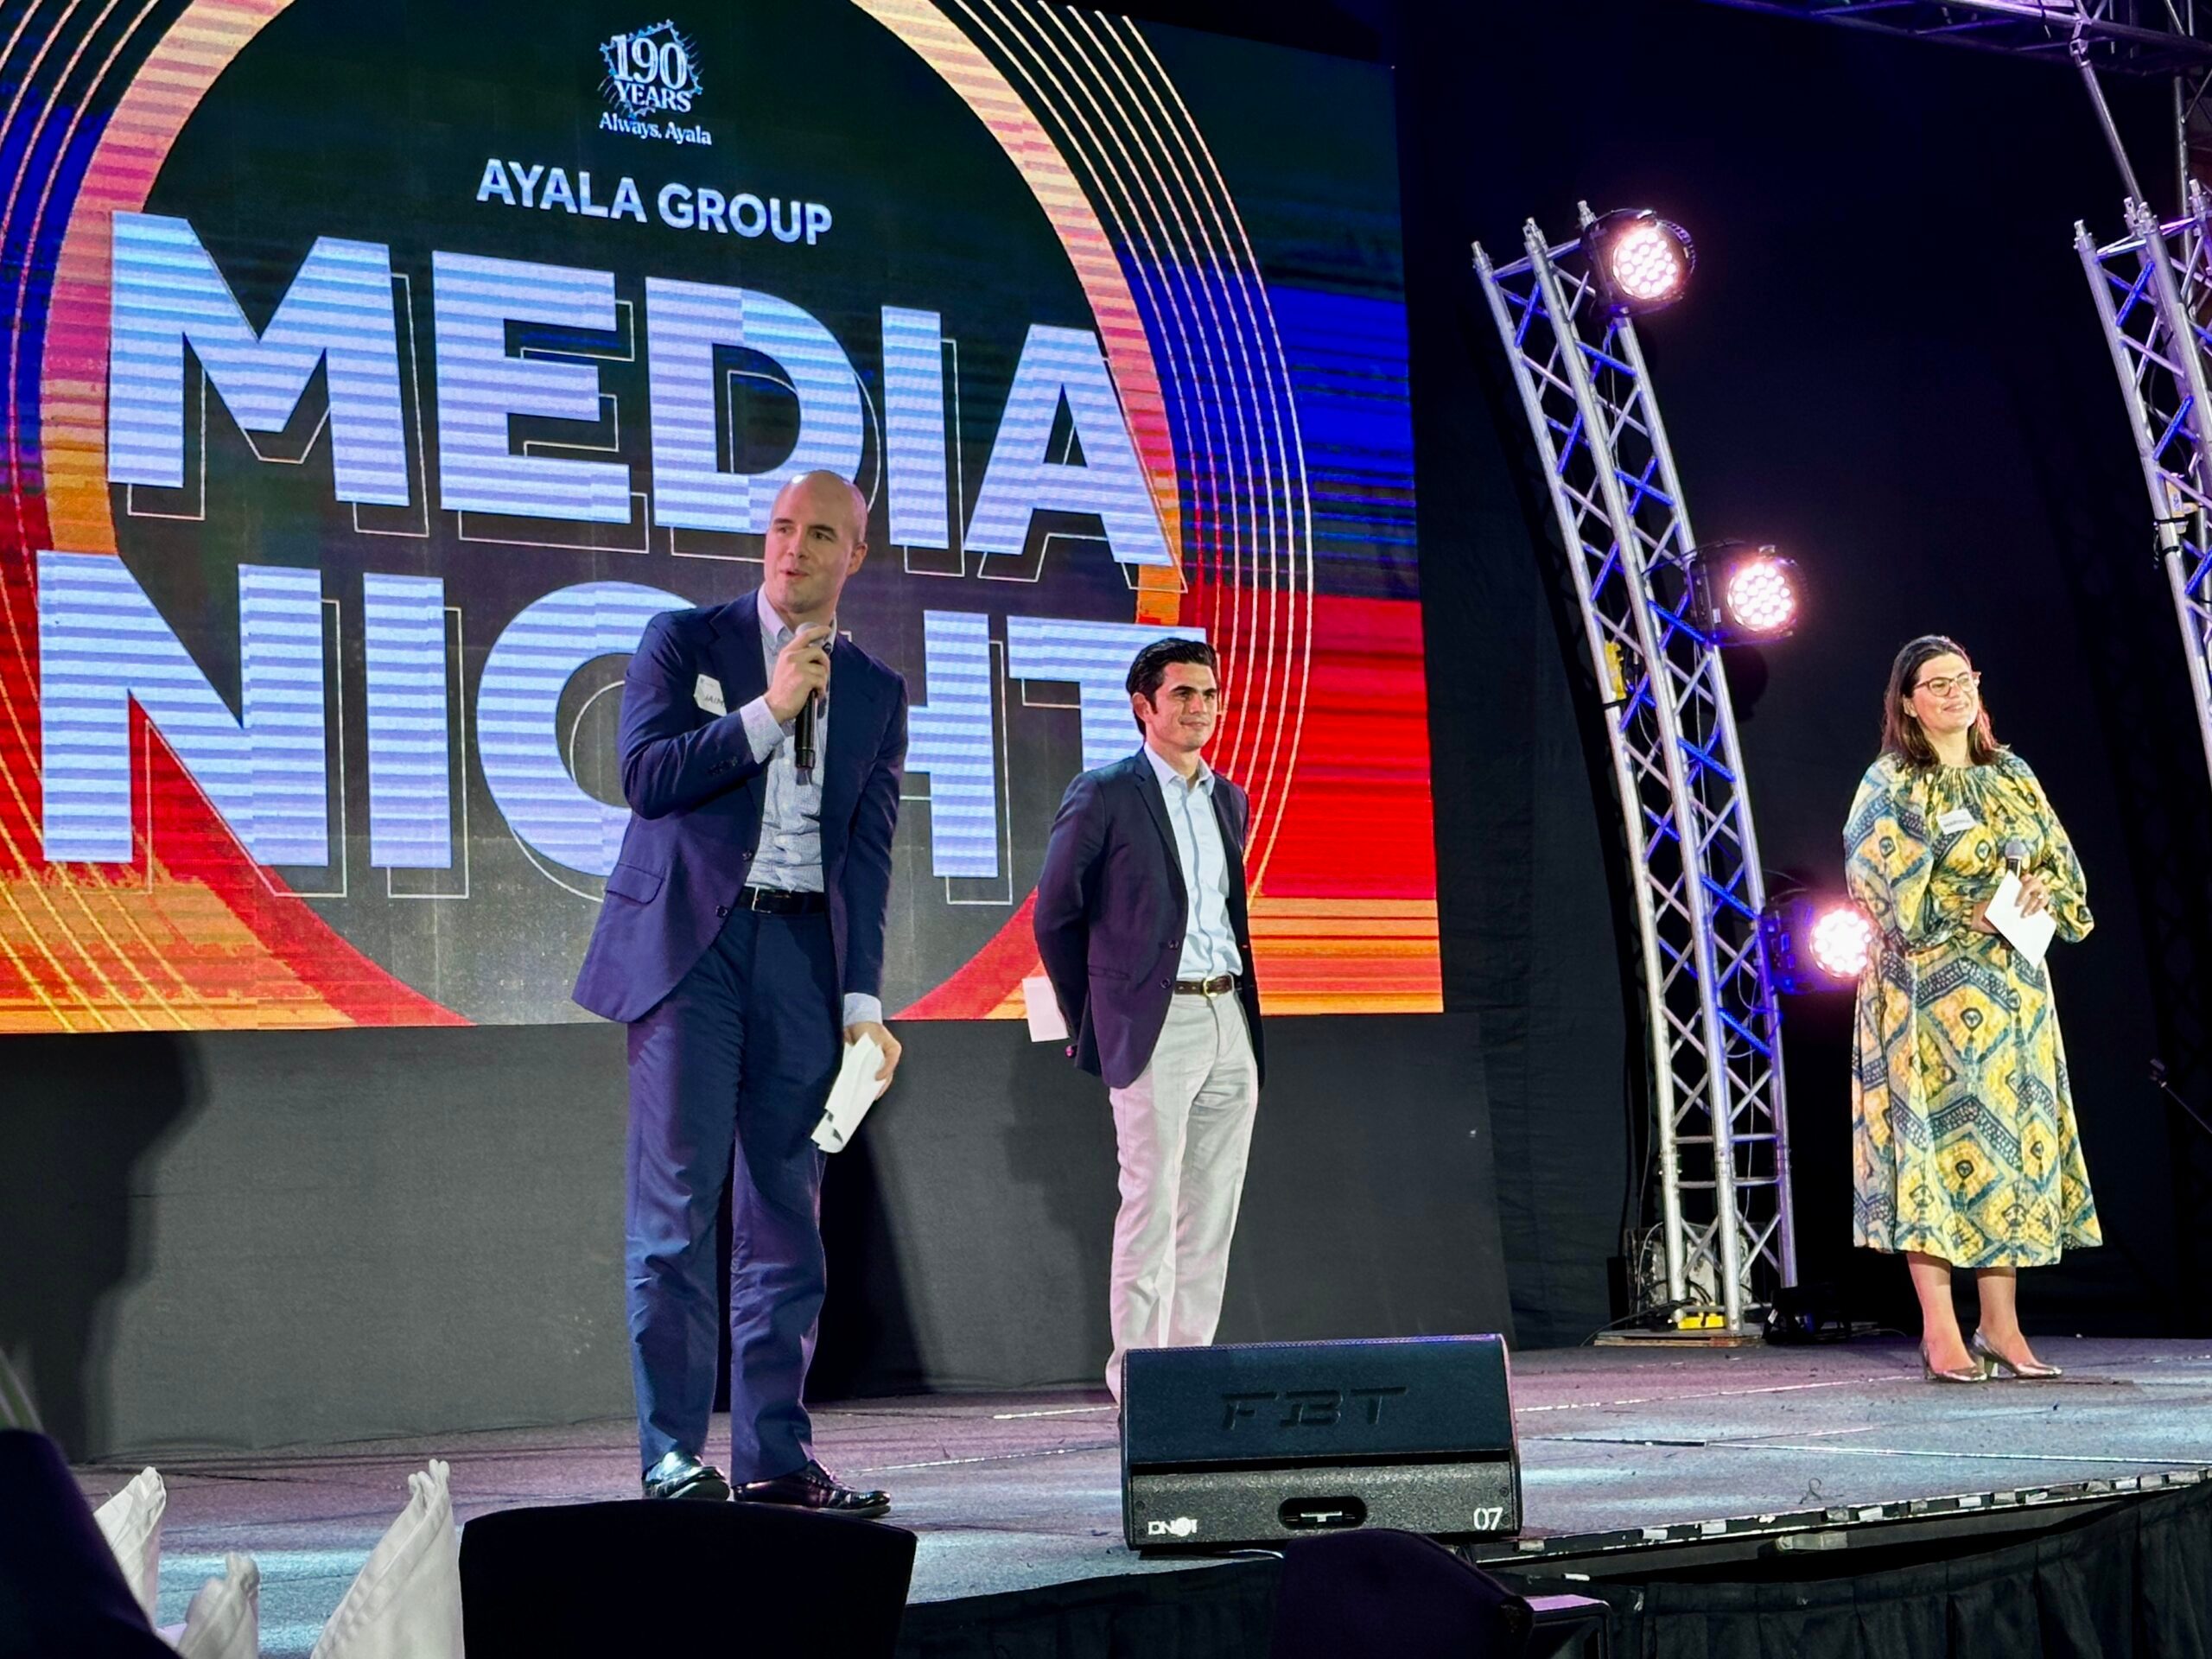 Next generation of Ayala leaders step into the spotlight at media party